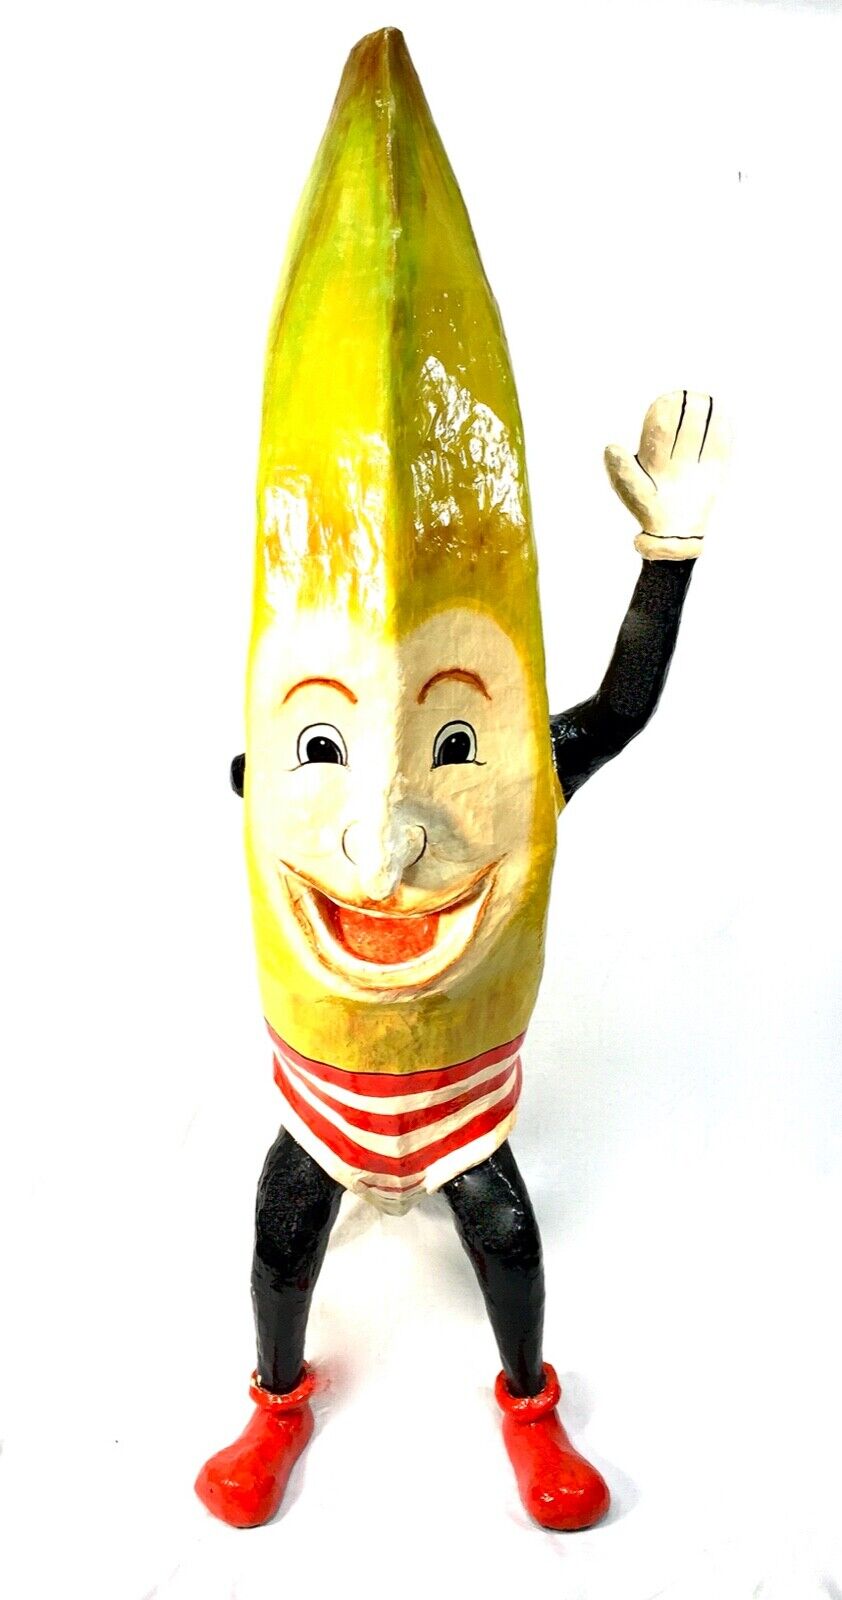 Antique Advertising - Large 1930's Fruit and Veg Shop Display Banana Statue Sign